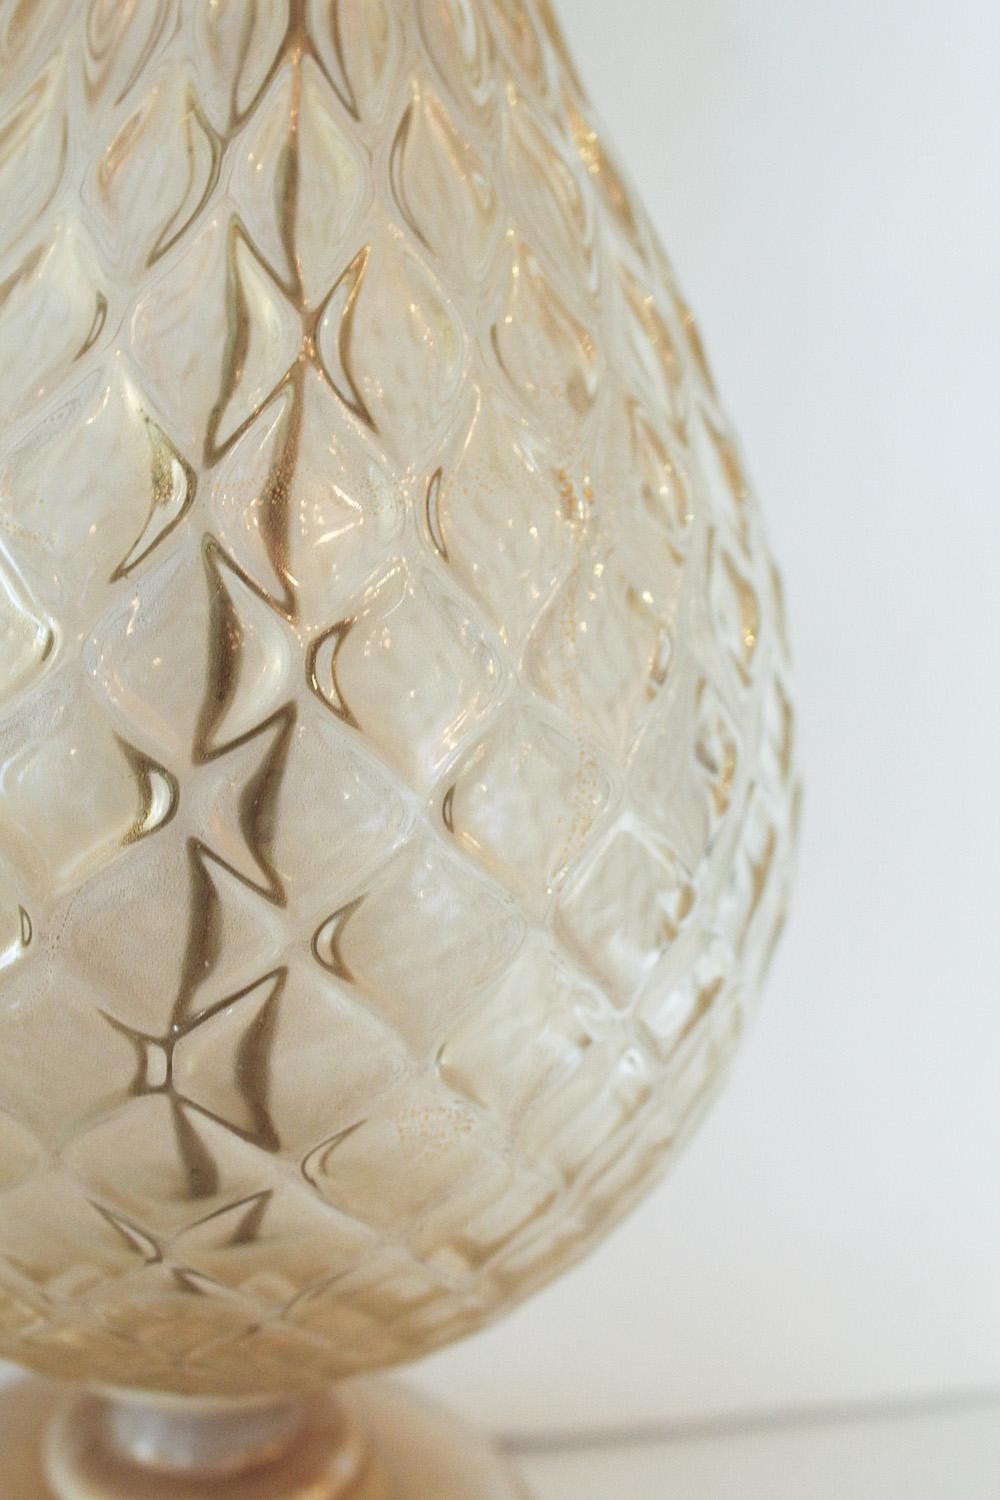 1960s Seguso White and Clear Gold Dusted Murano Glass Pineapple Lamp In Good Condition For Sale In North Miami, FL